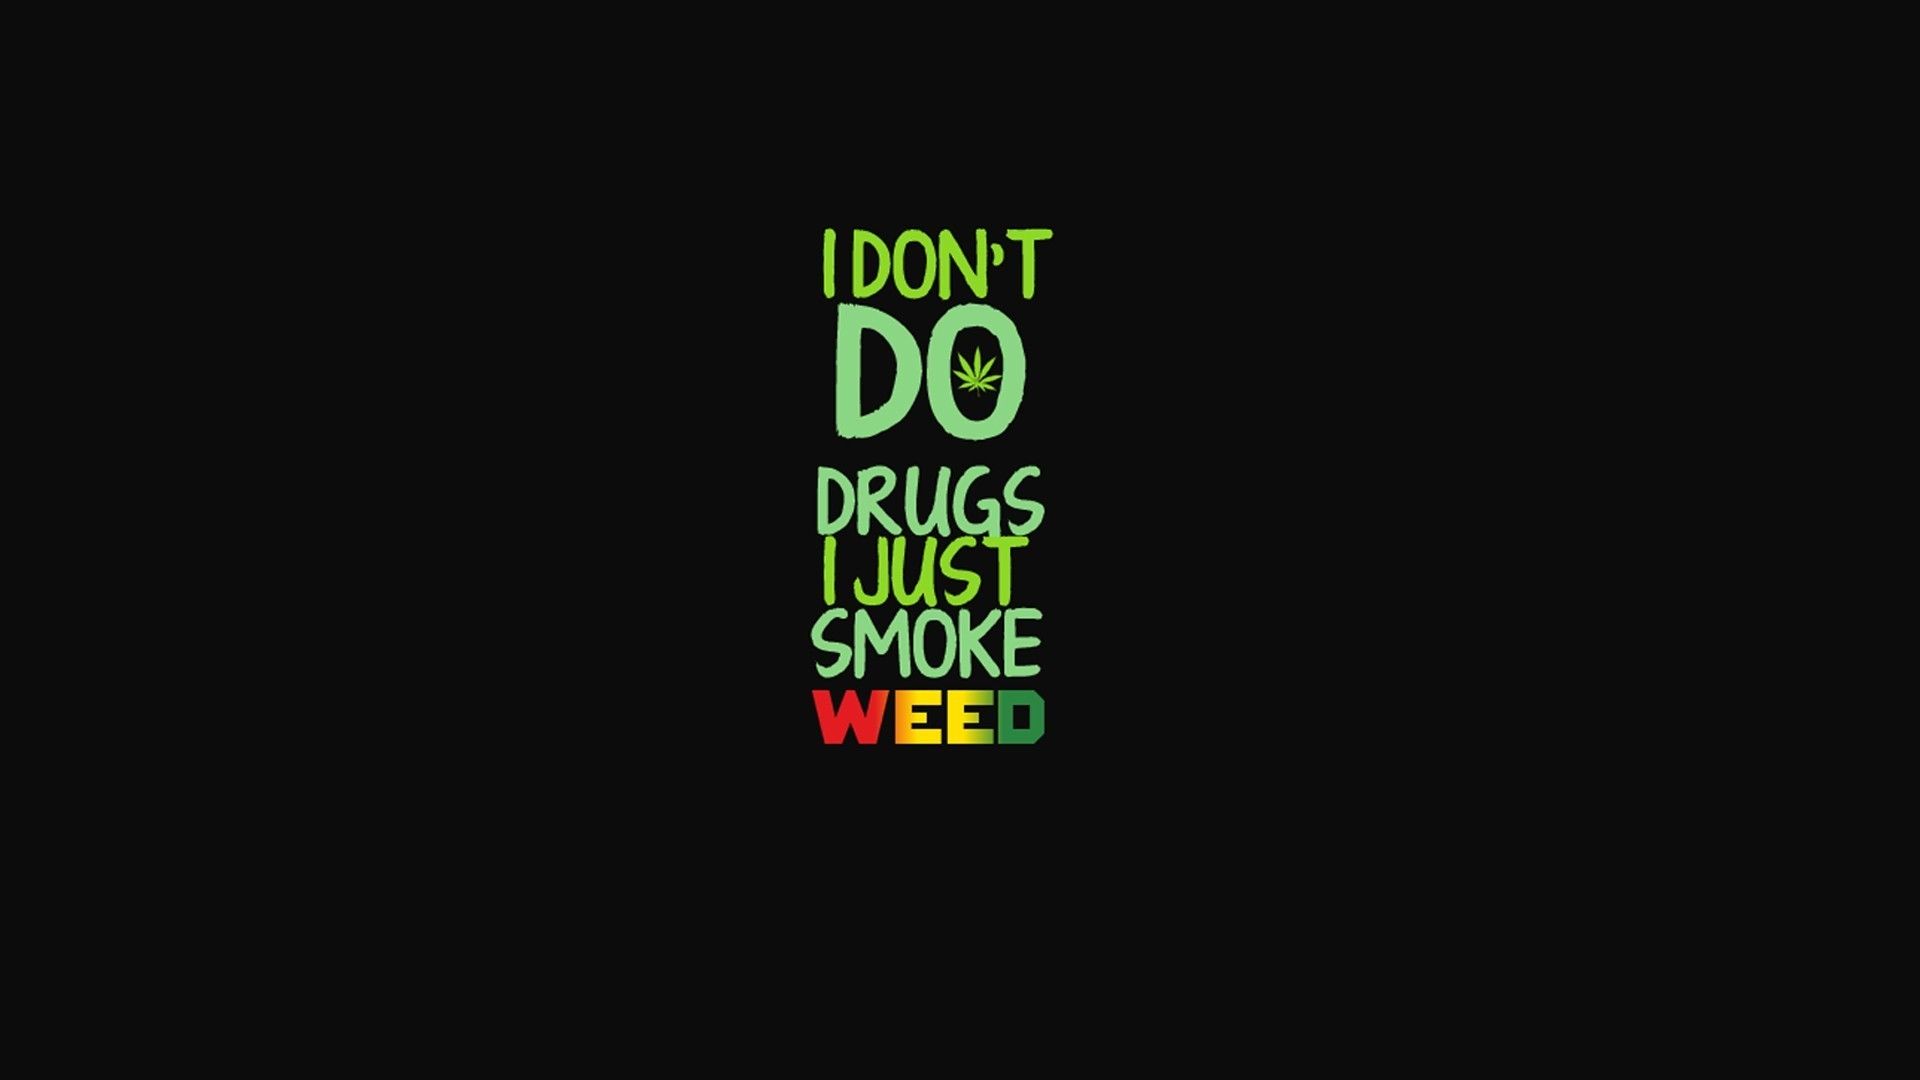 Stoner Wallpaper. Stoner Wallpaper Tumblr, Stoner Wallpaper and Trippy Stoner Background